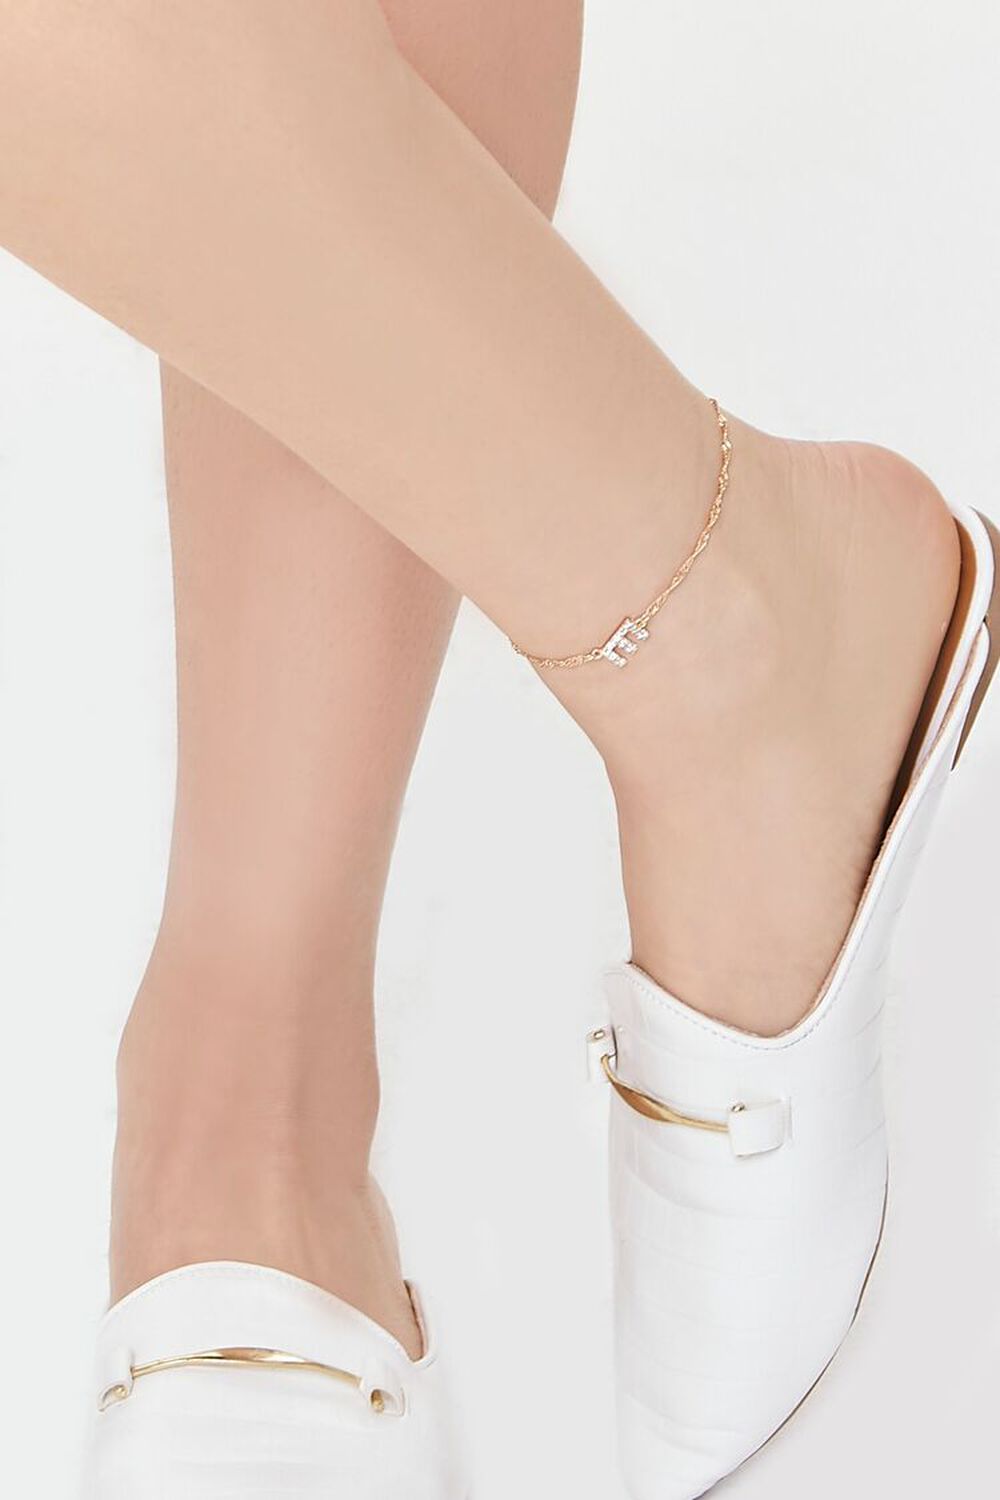 GOLD/E Rhinestone Initial Charm Anklet, image 1